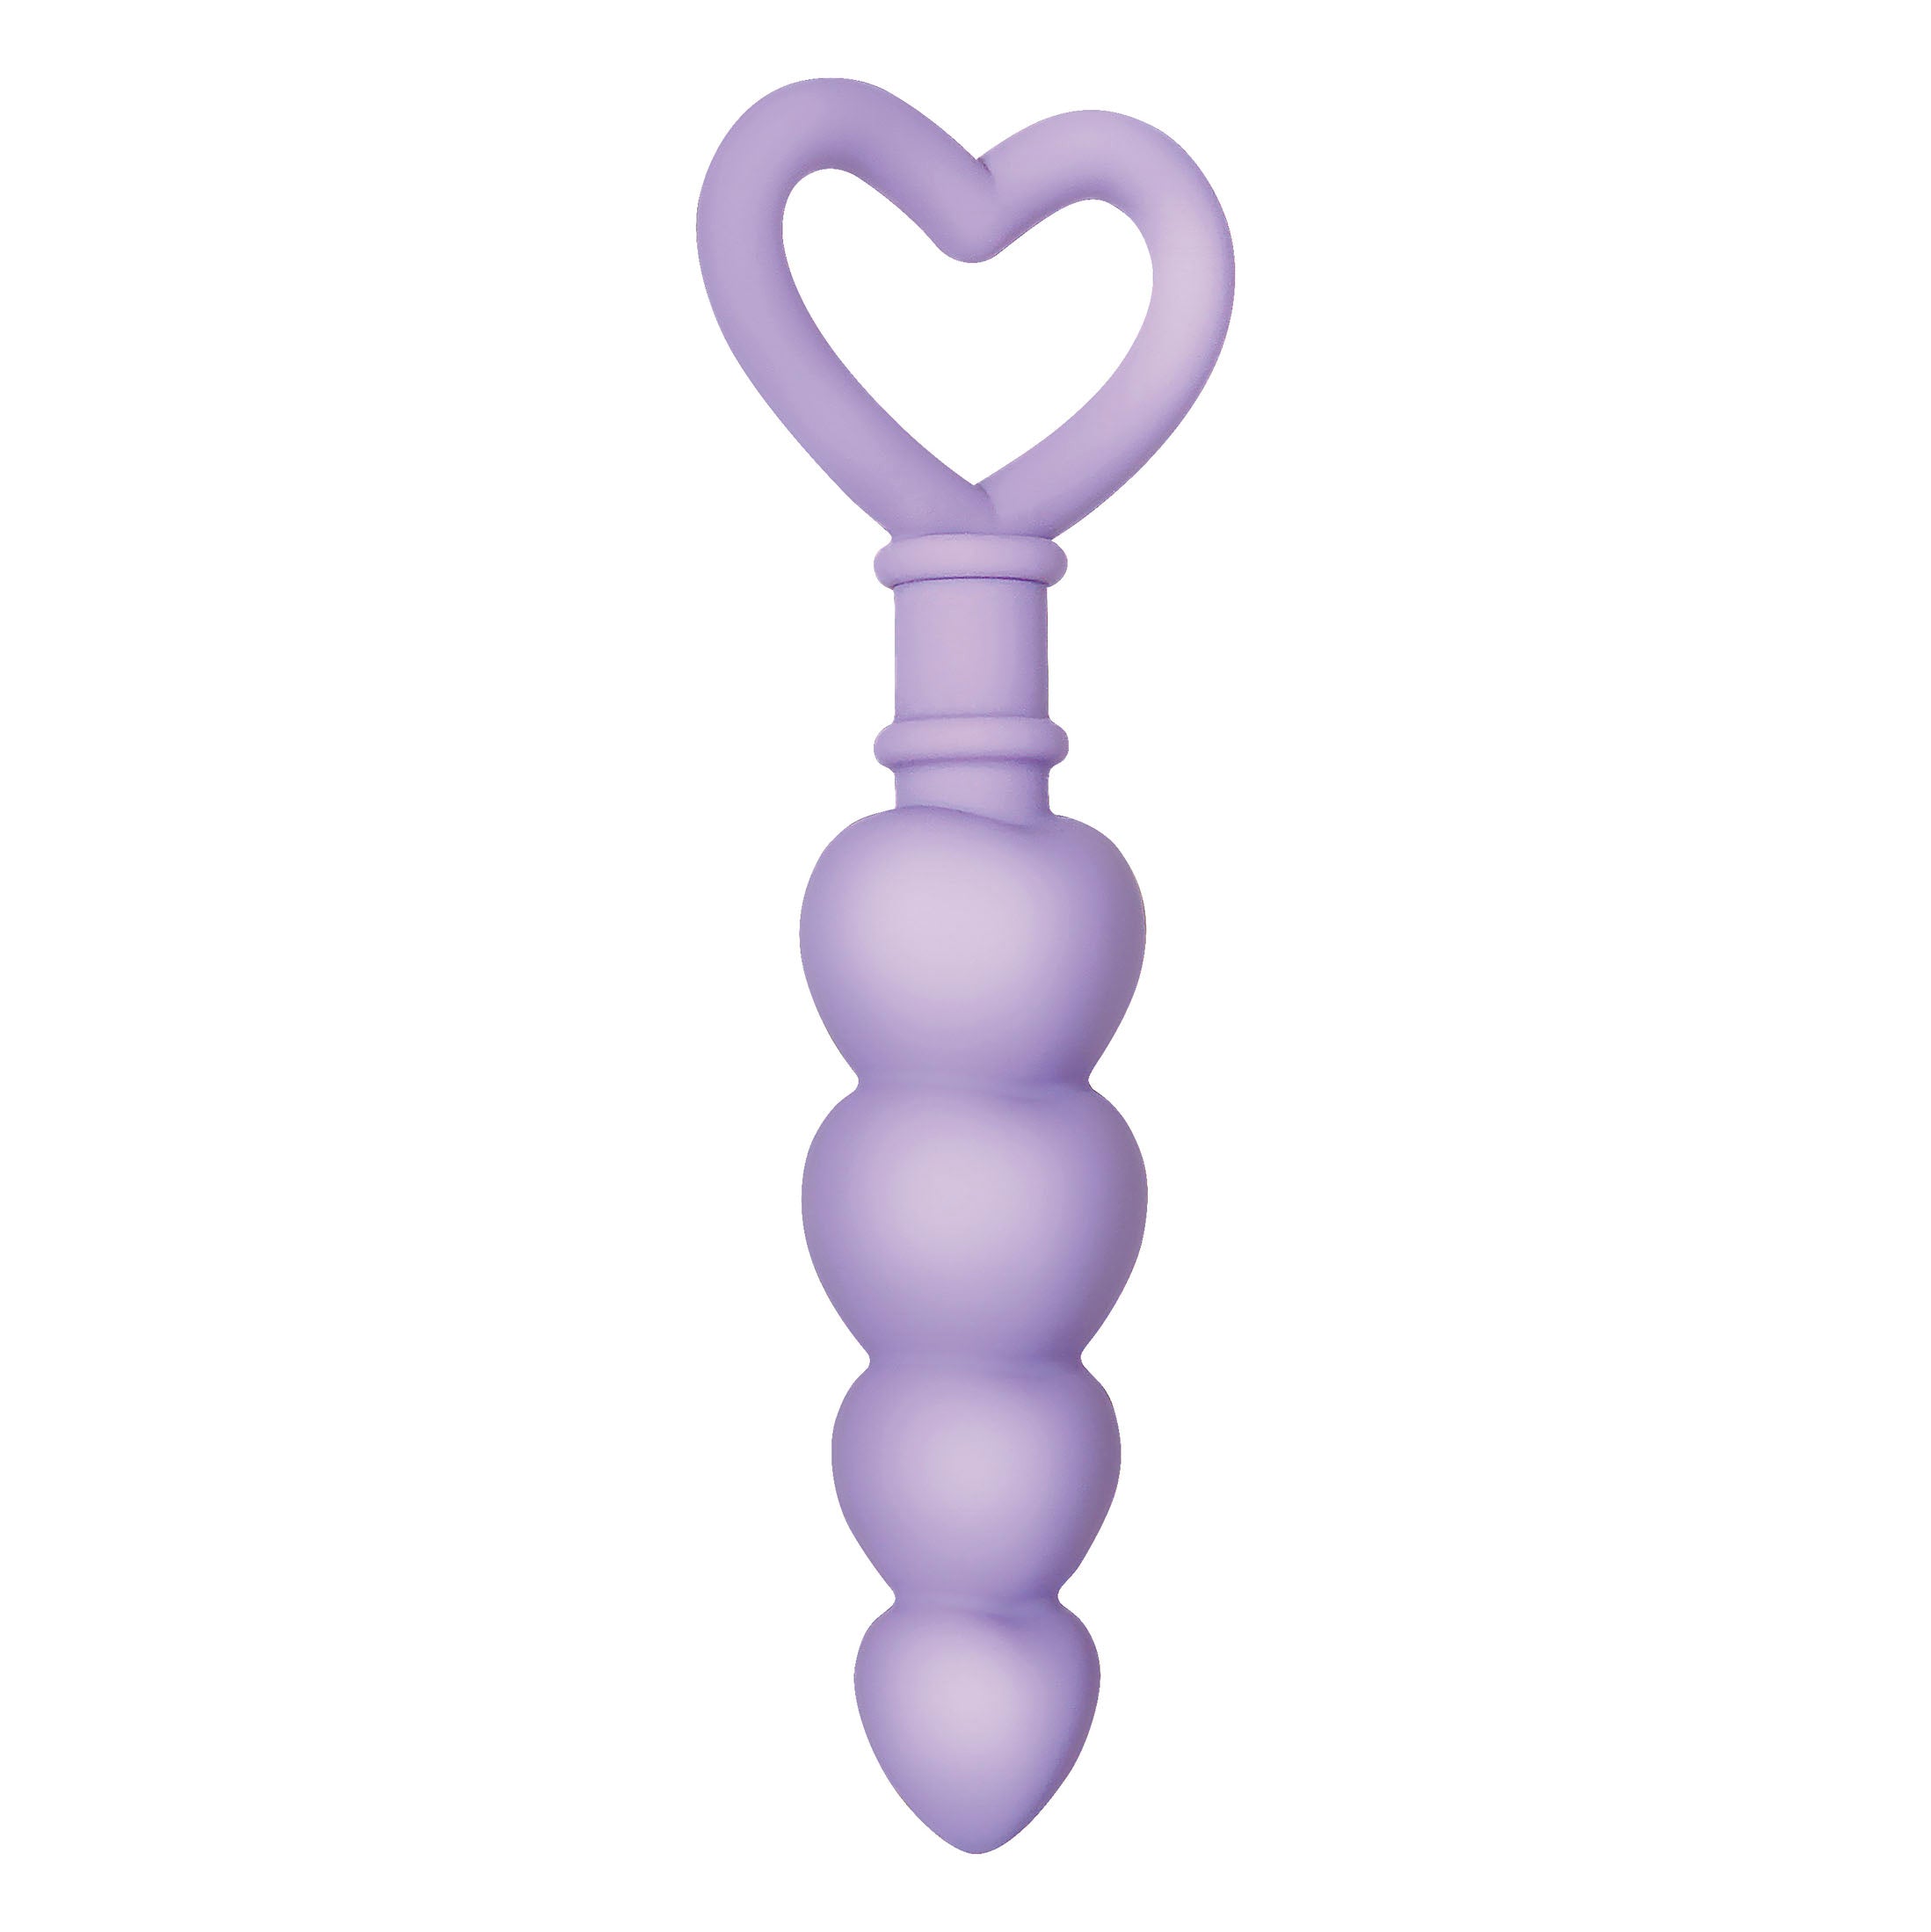 Vibrators, Sex Toy Kits and Sex Toys at Cloud9Adults - Sweet Treat Silicone Anal Beads - Buy Sex Toys Online